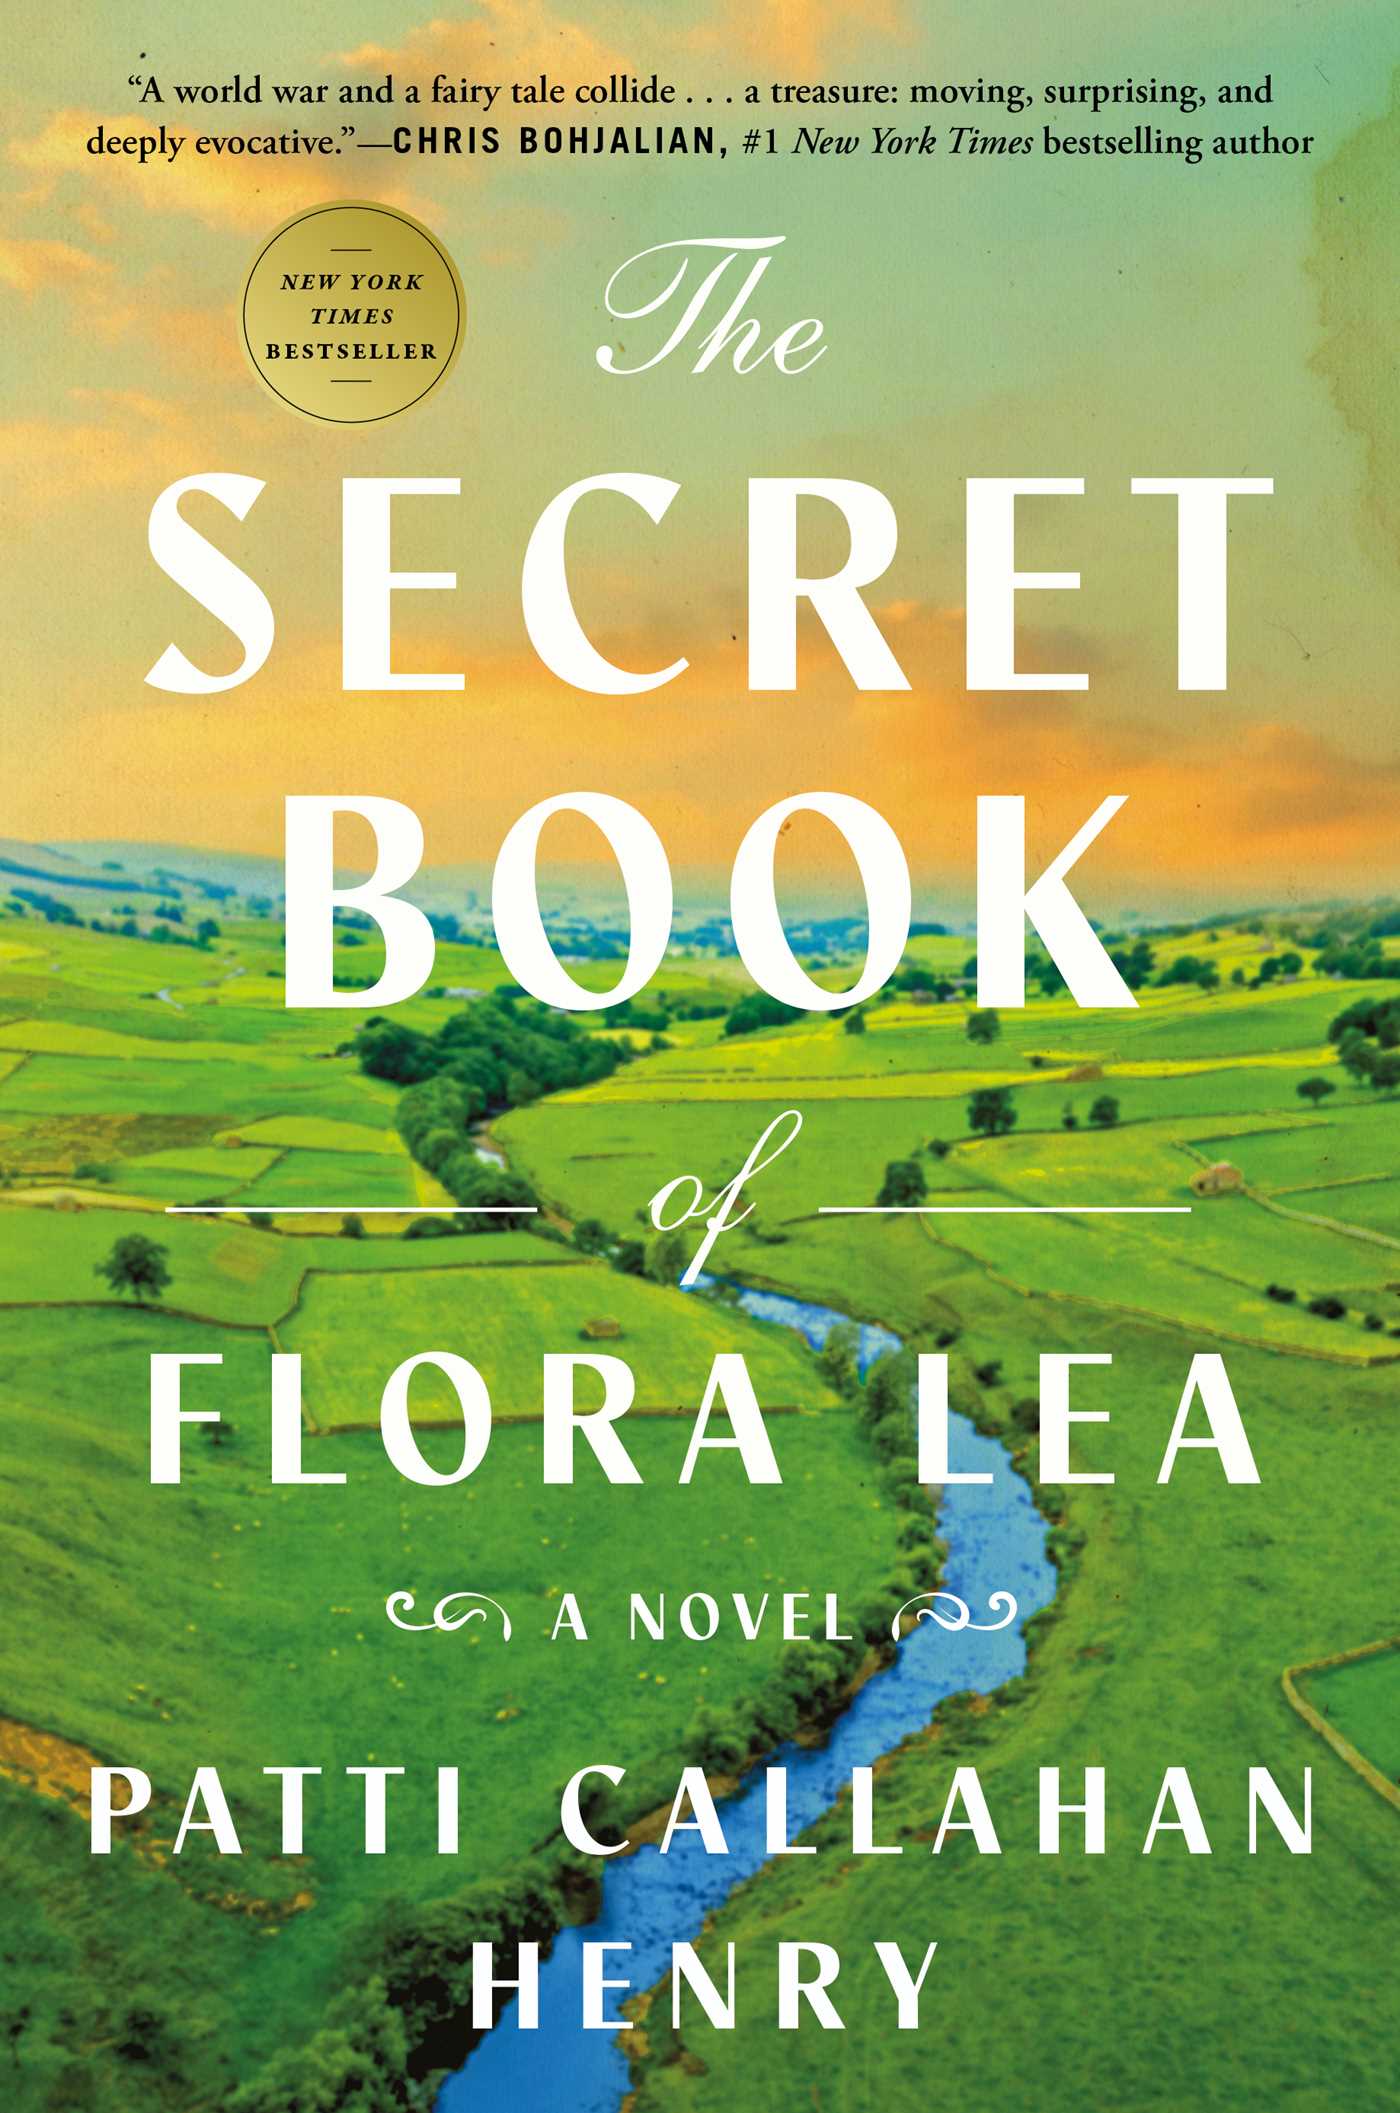 The Secret Book of Flora Lea by Patti Callahan Henry